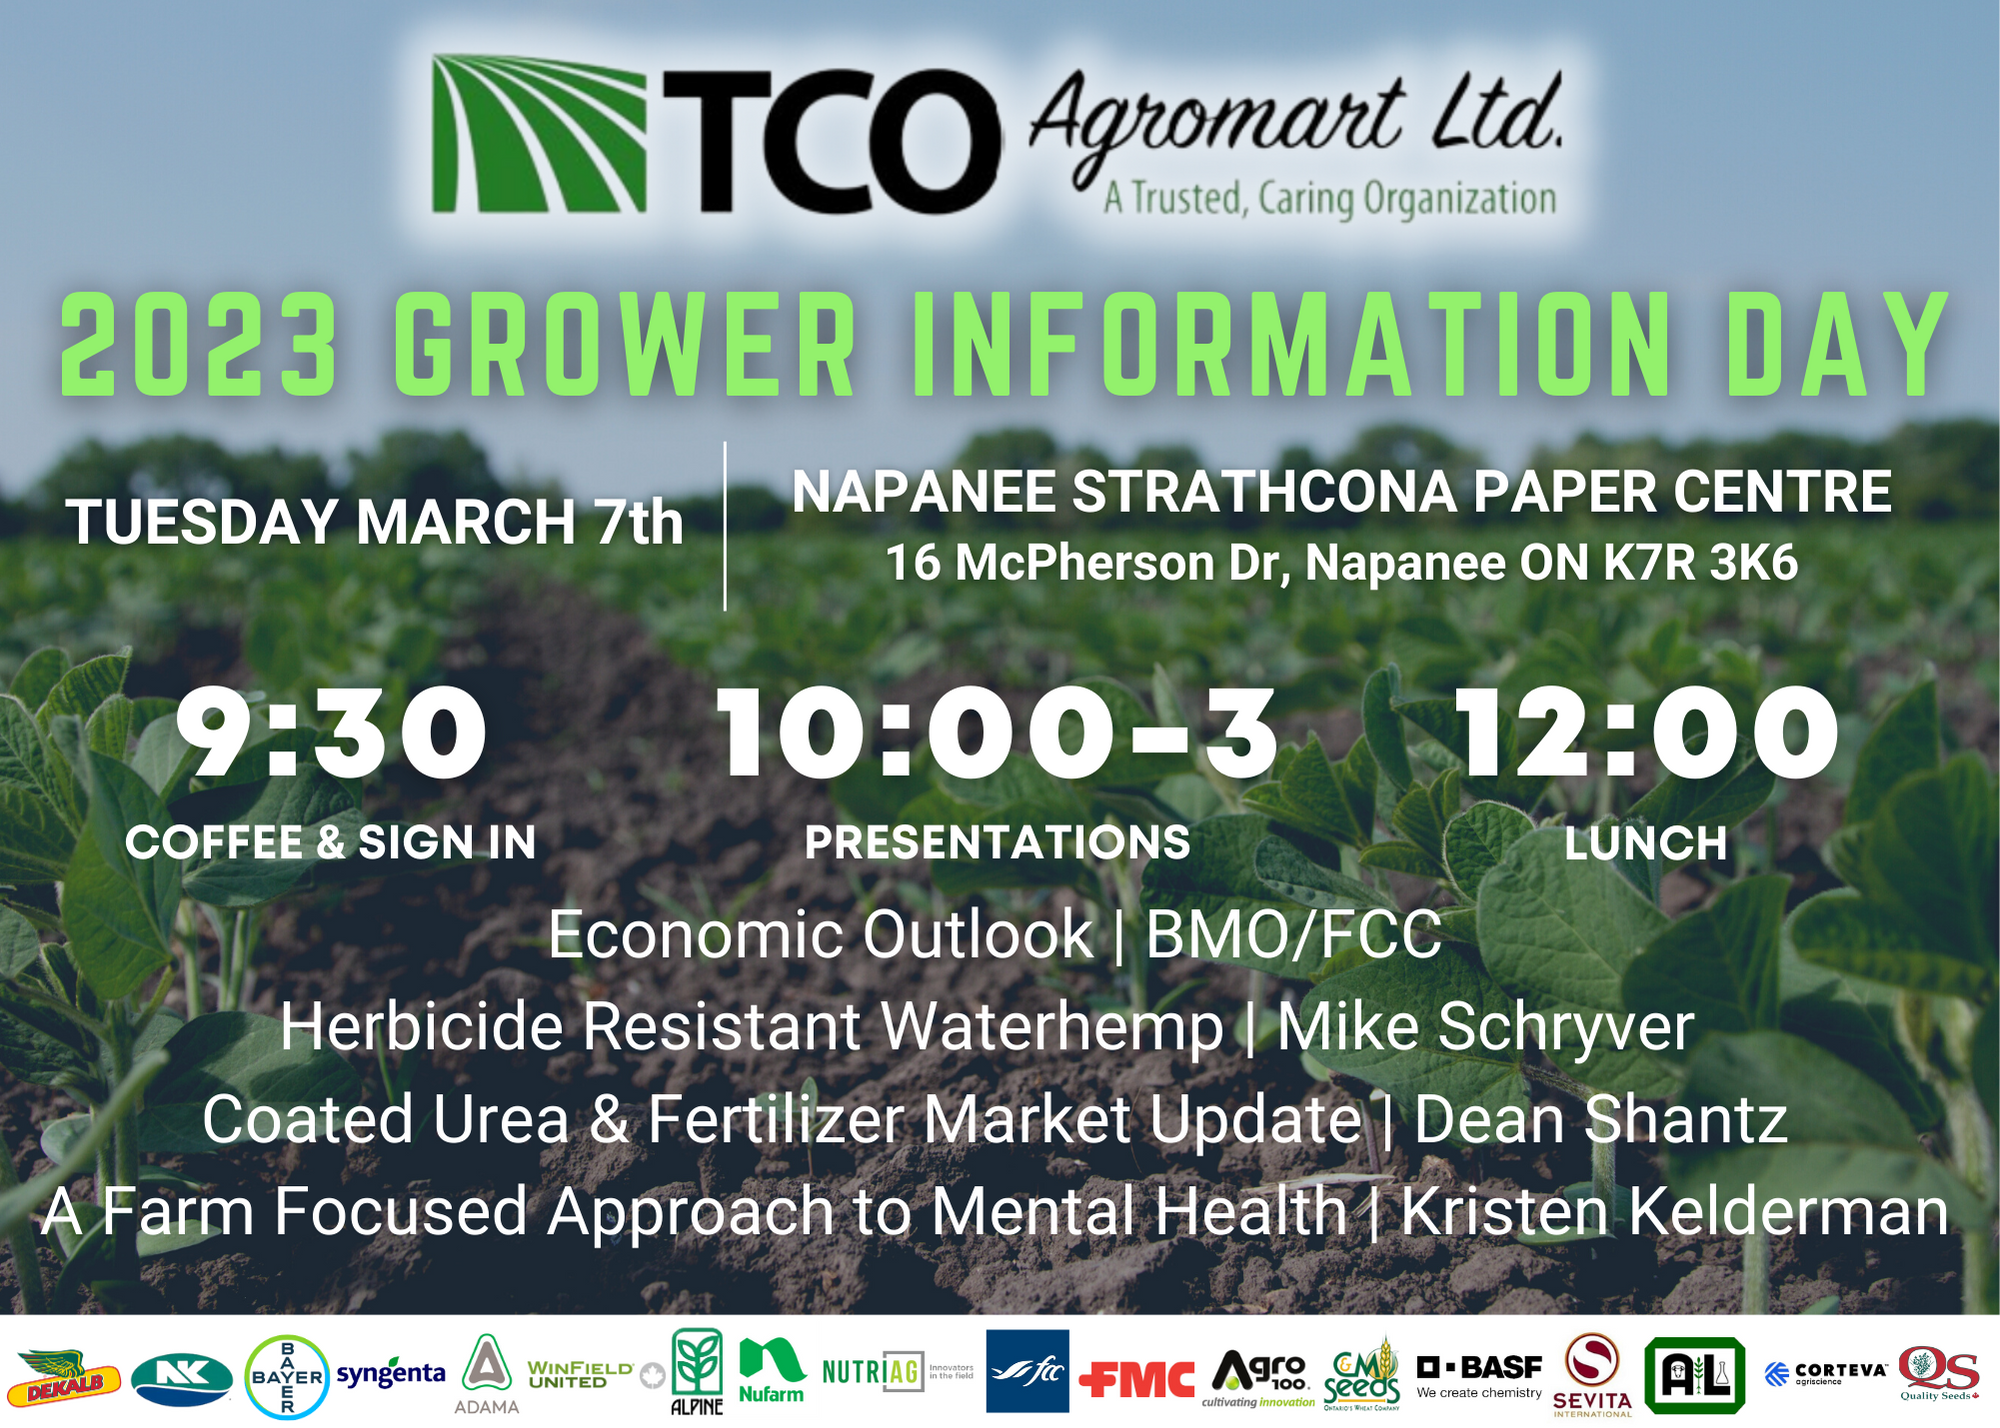 TCO Agromart 2023 Grower Information Day